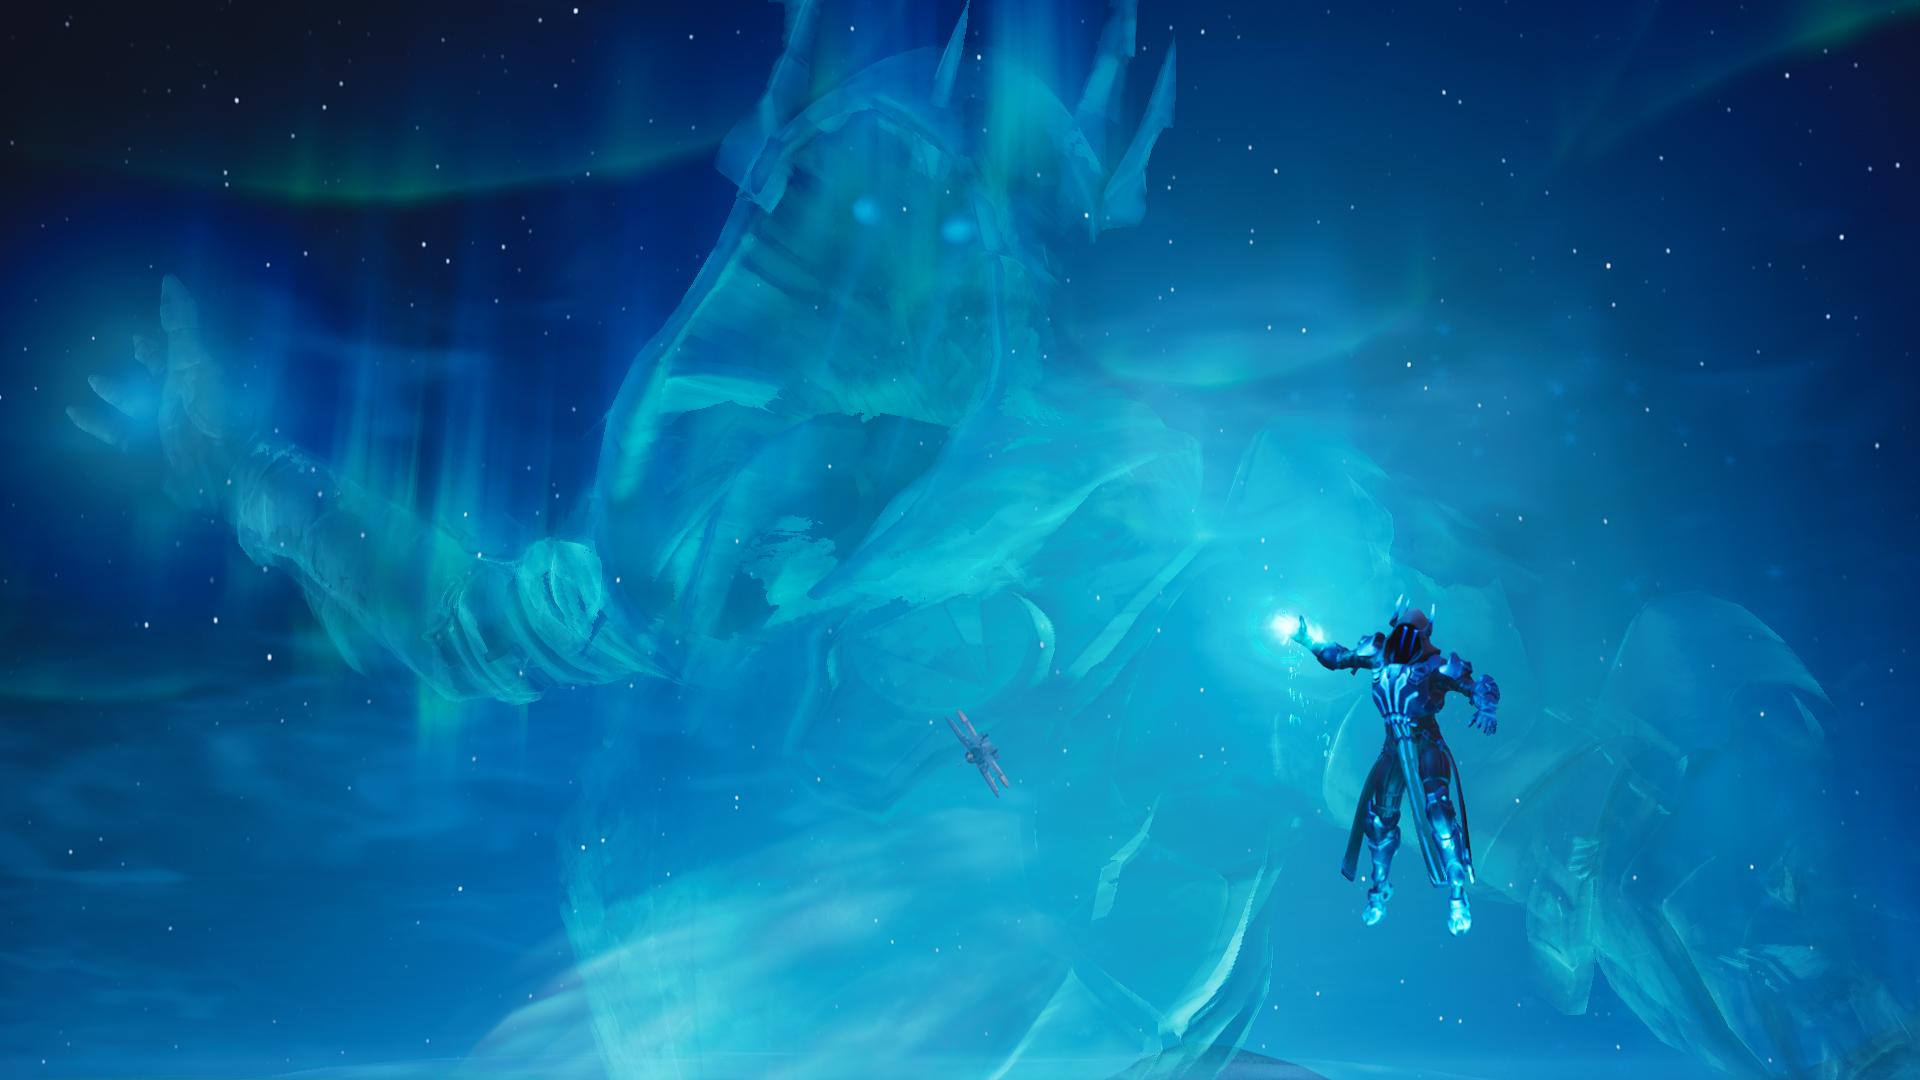 Fortnite's Ice Storm Event Begins After In Game Event Covers Map In Snow